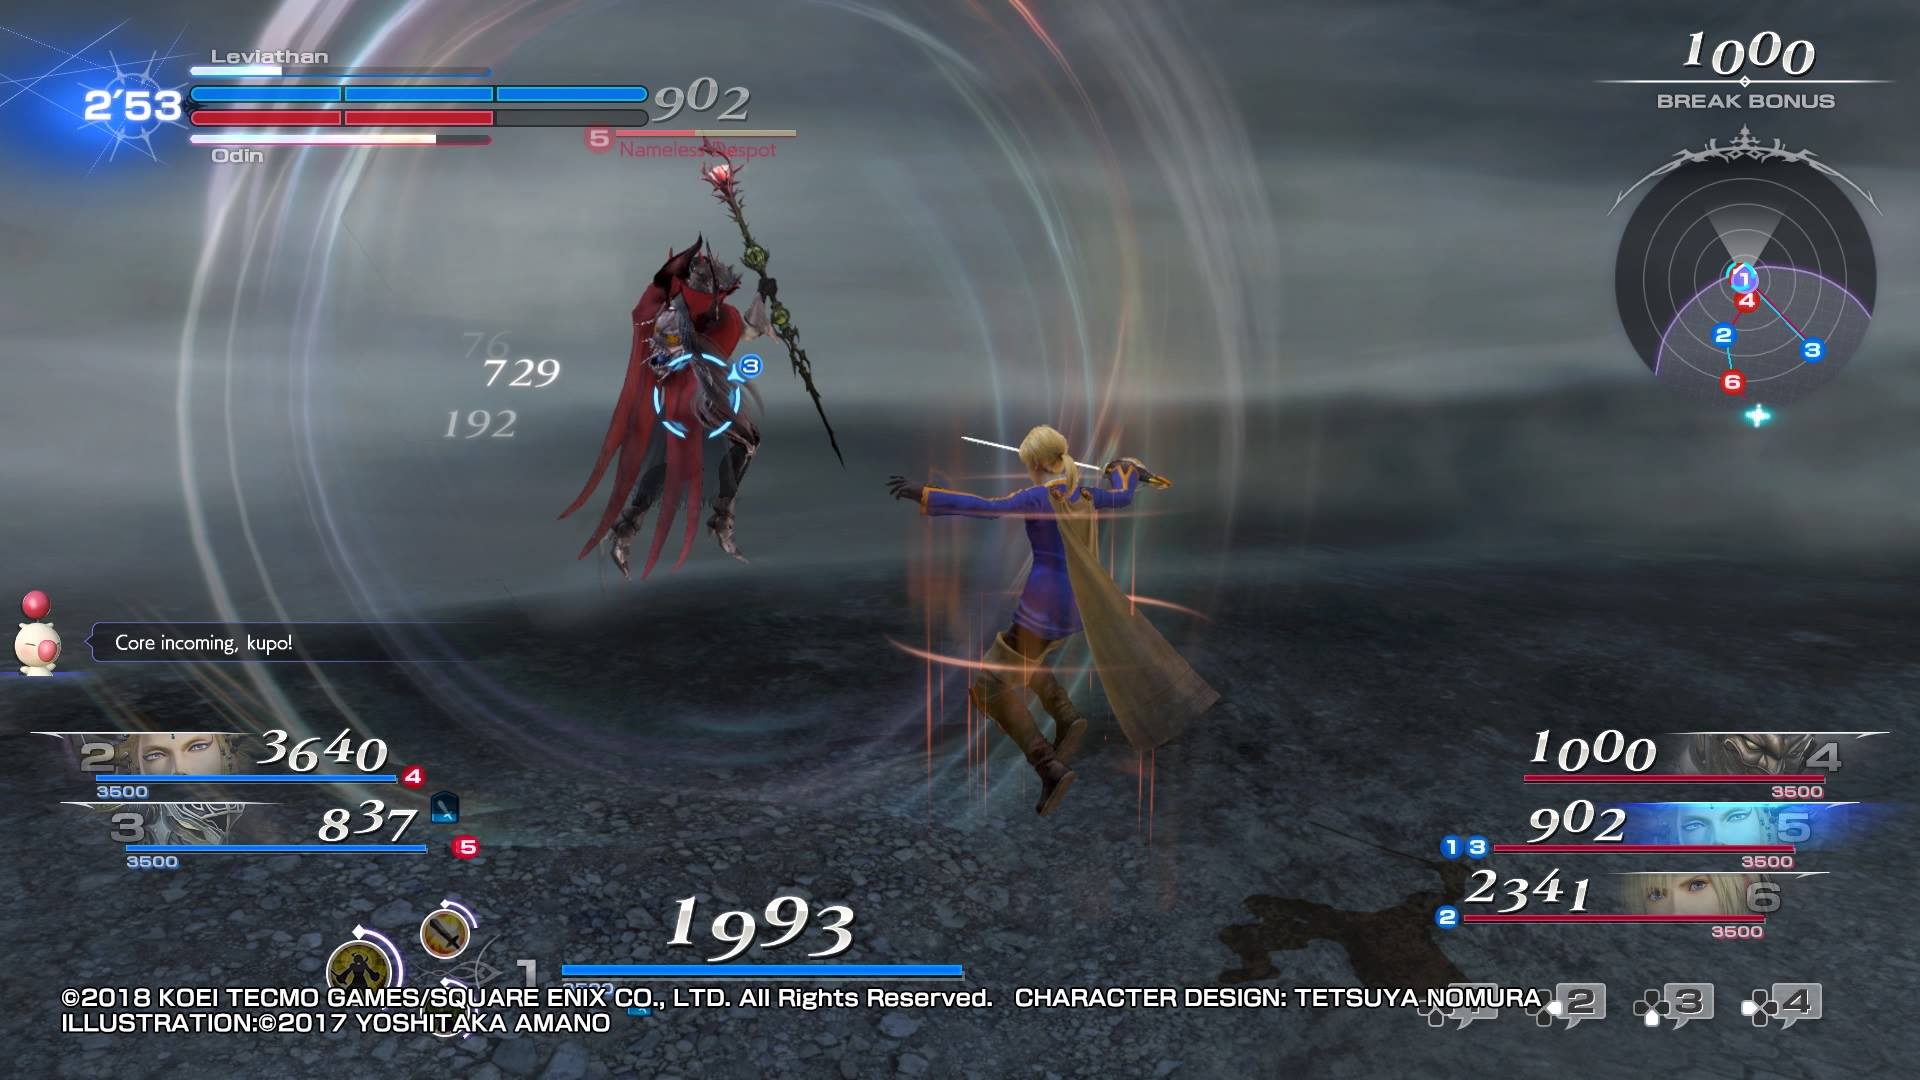 Leviathan in the midst of battle in Dissidia